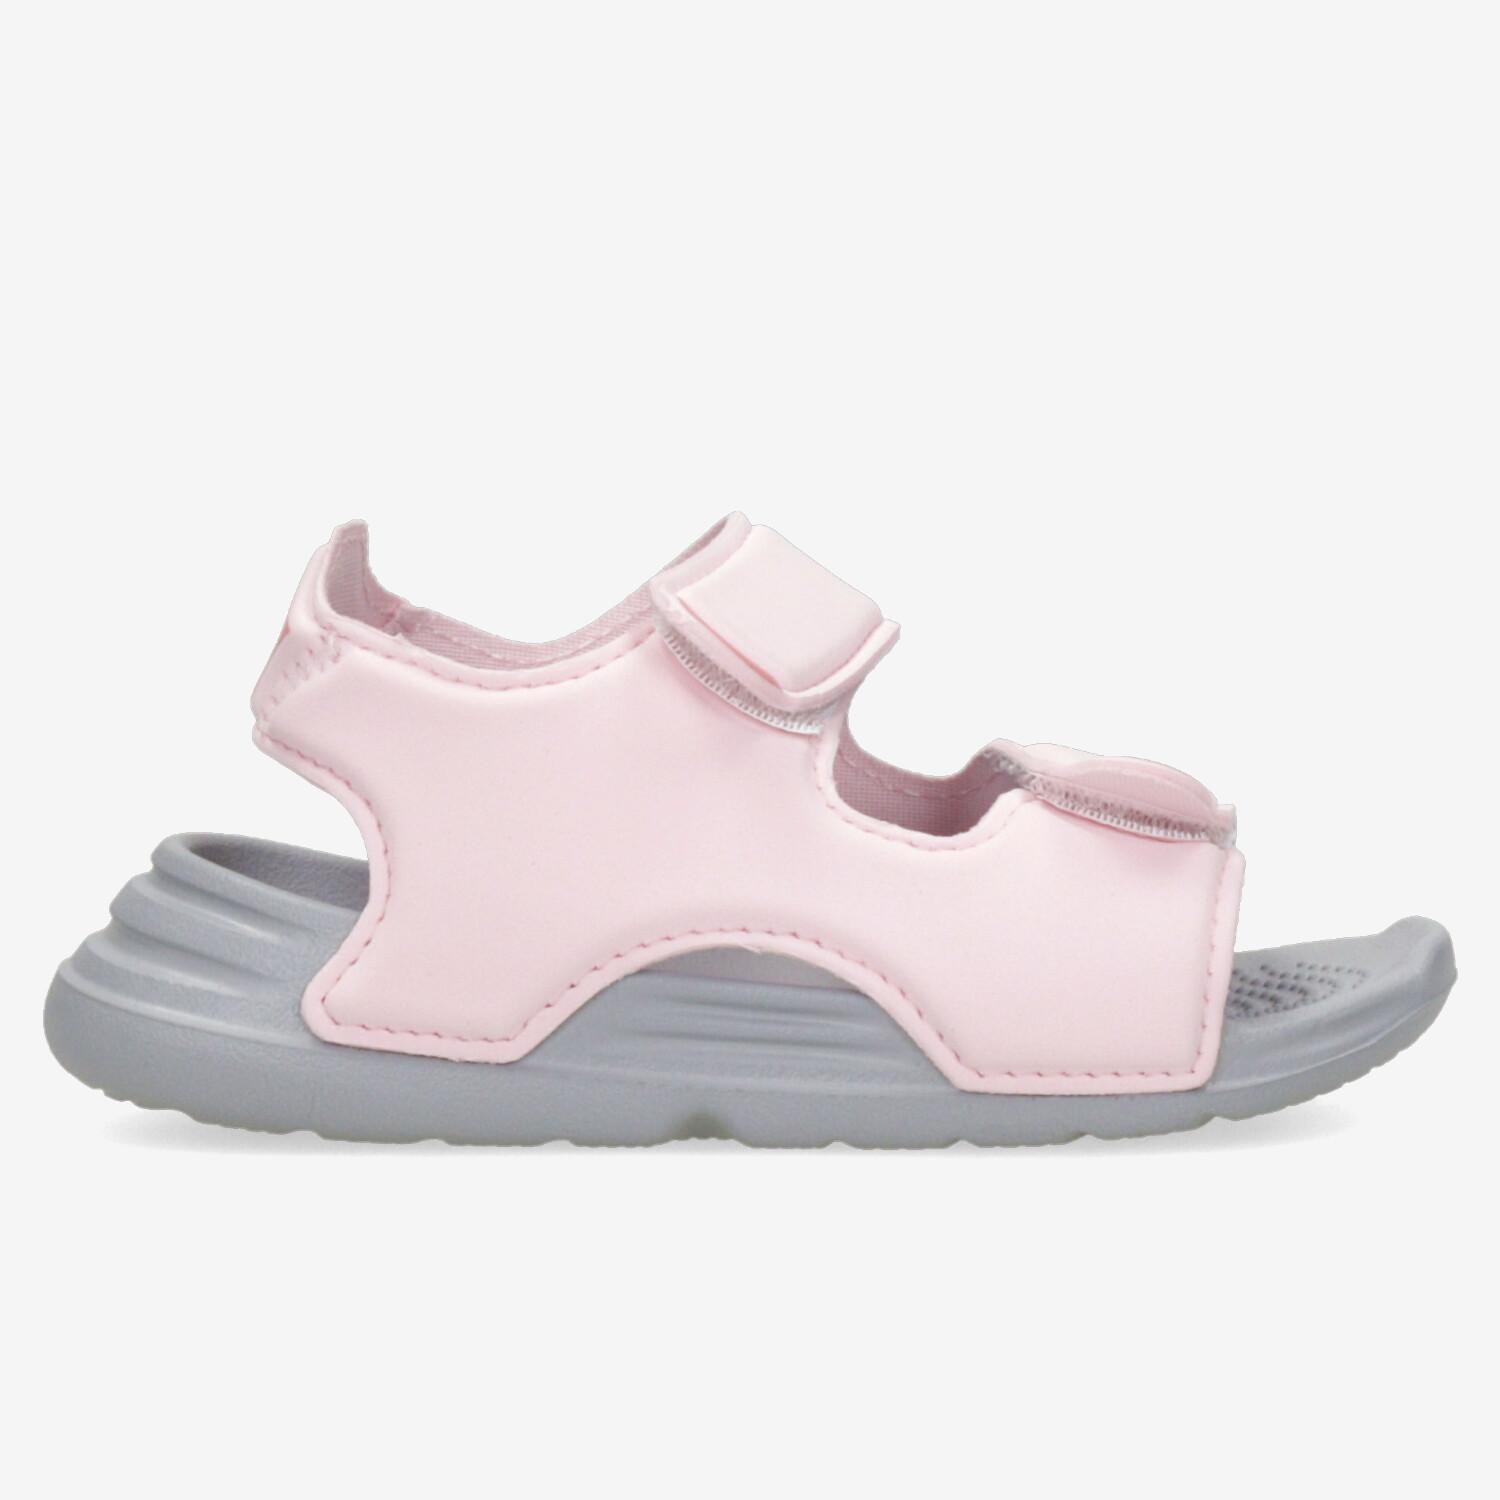 adidas Swim - Rose - Chaussures Fille sports taille 20